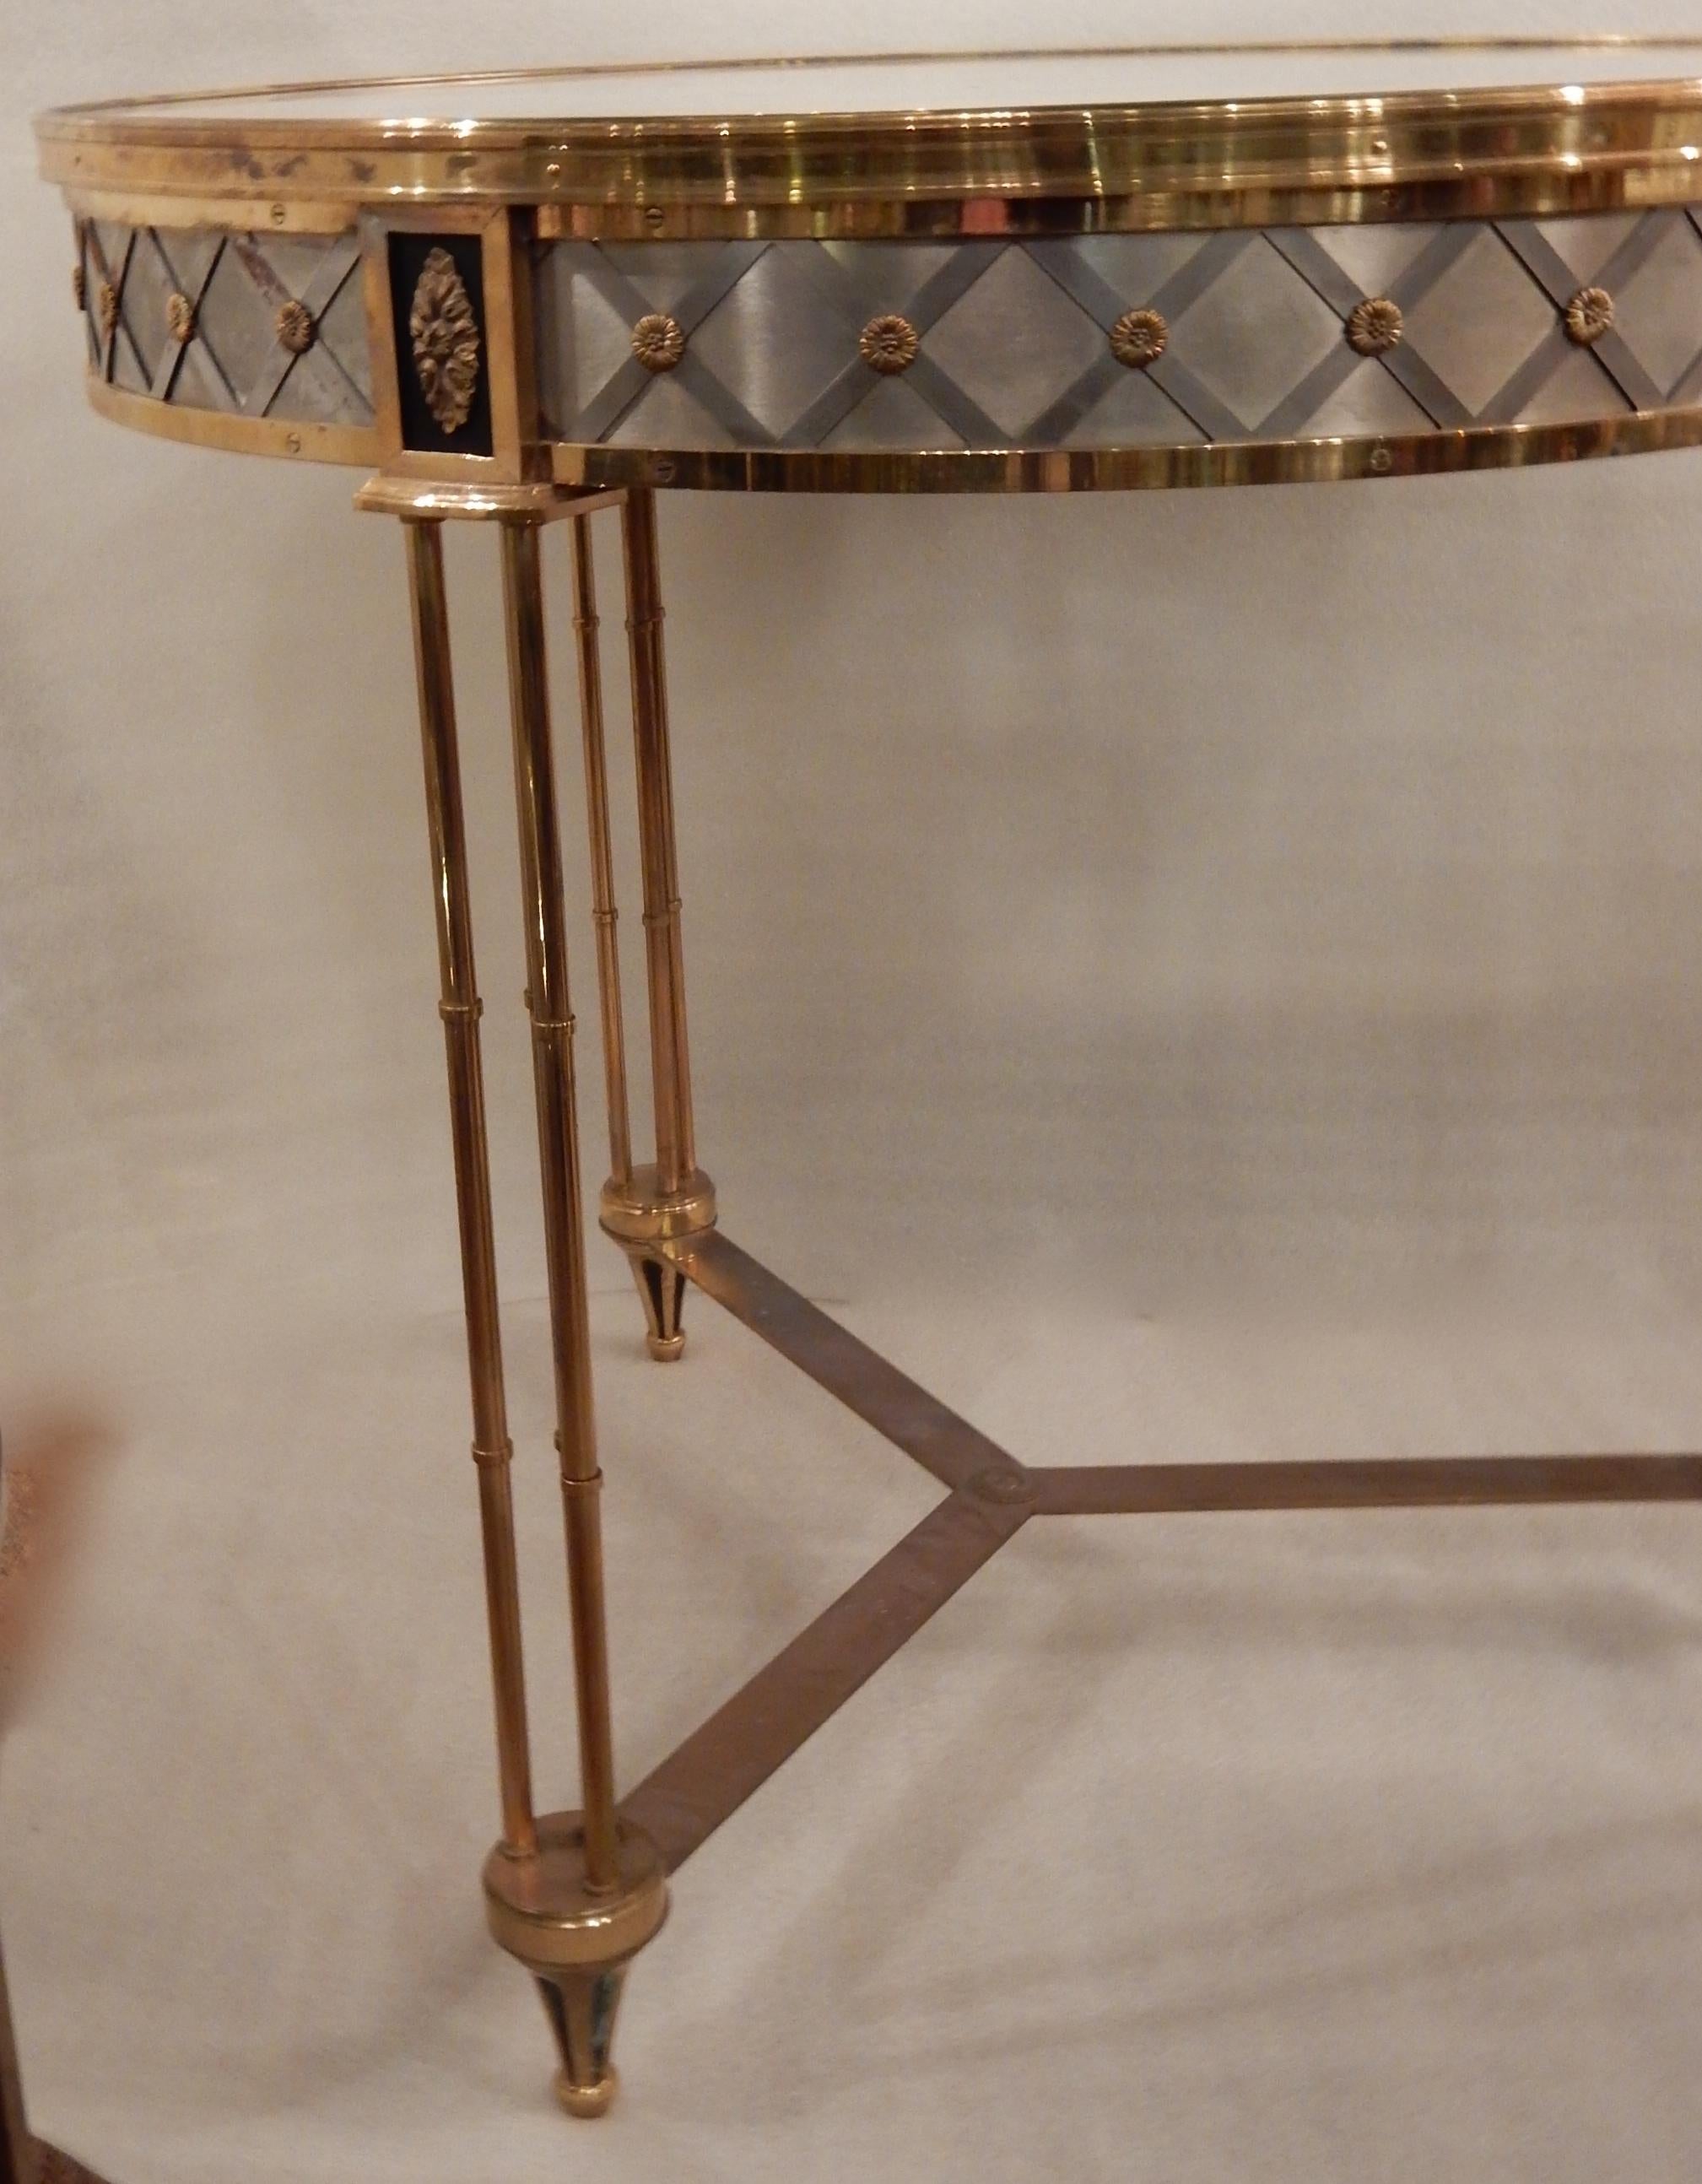 Pedestal table in gilded bronze with an upper top in white marble, supported by three feet, each made of three rods imitating bamboo which end in a spinning top foot, the feet are linked together by a spacer decorated with a central pellet. The